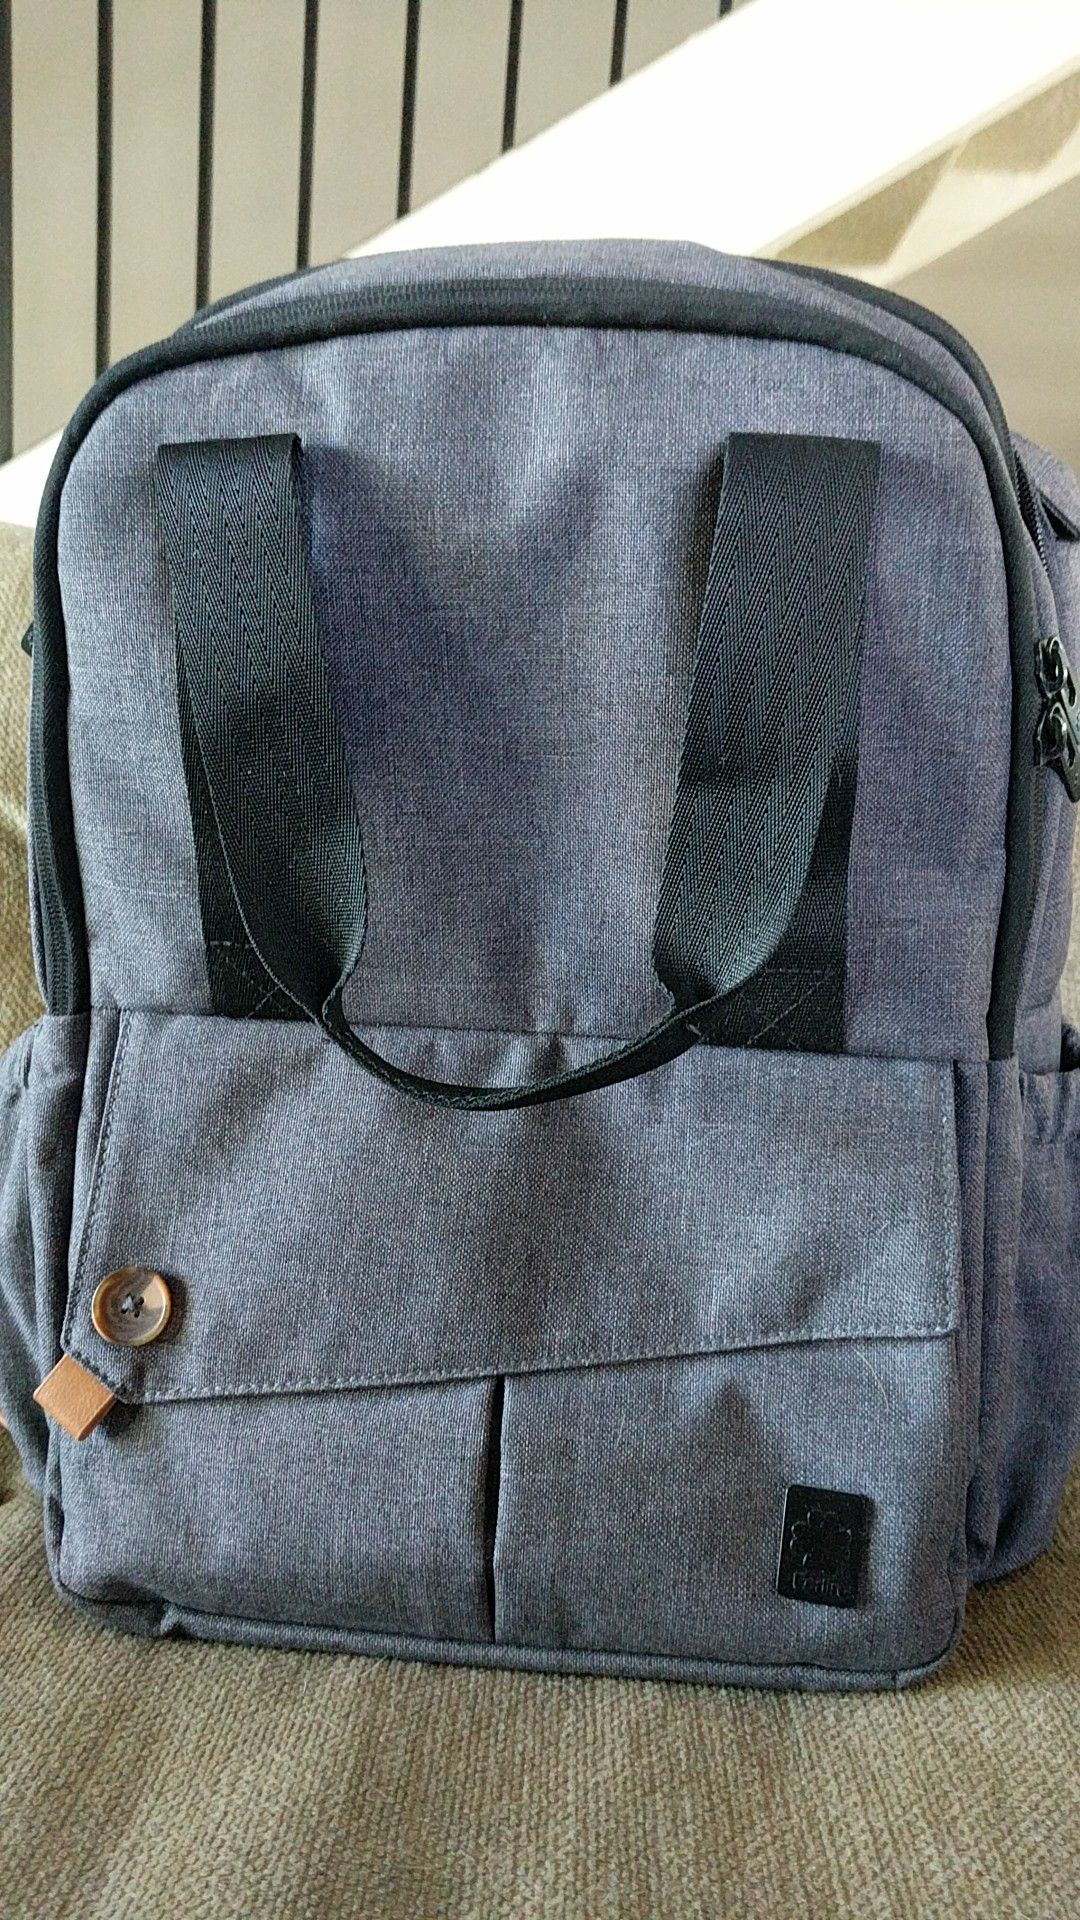 Ferlin Diaper Backpack - Will Remove Post When Sold